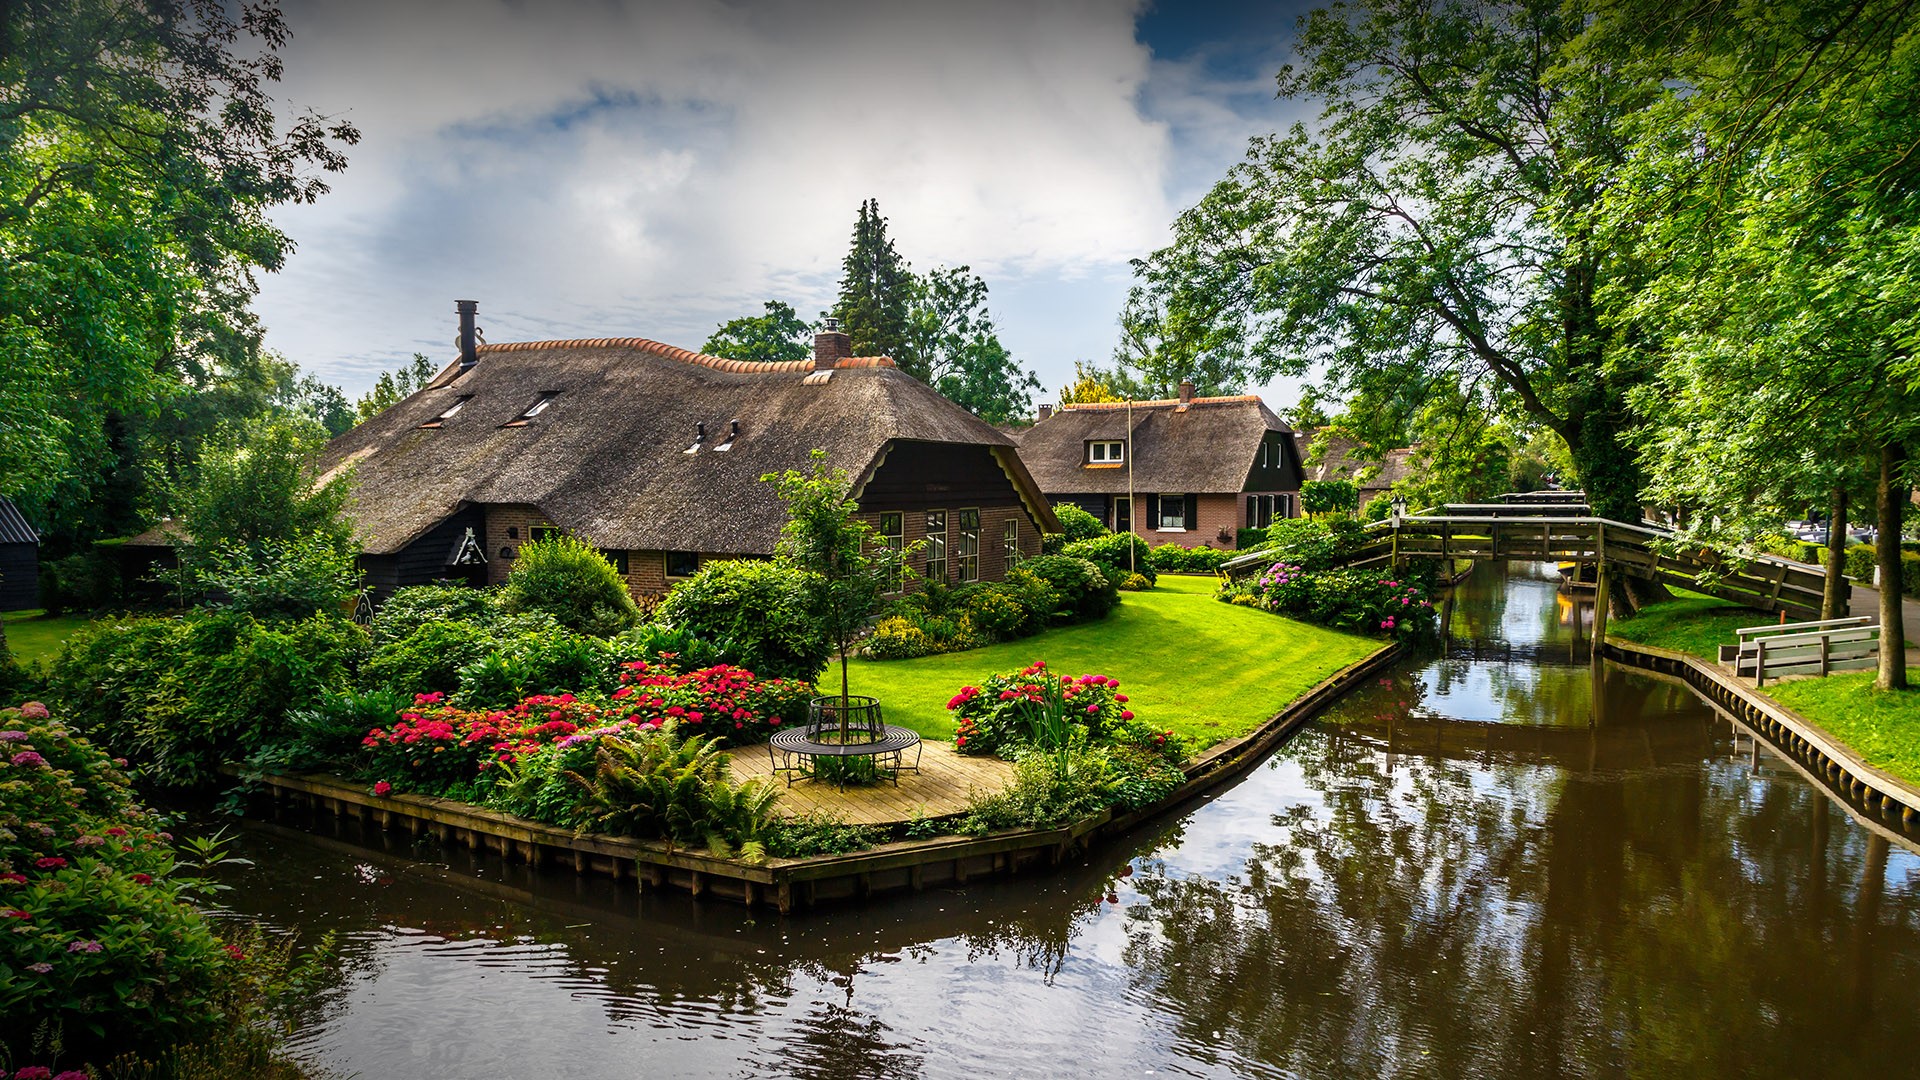 Of Giethoorn Village With Canals And Rustic Thatched Roof